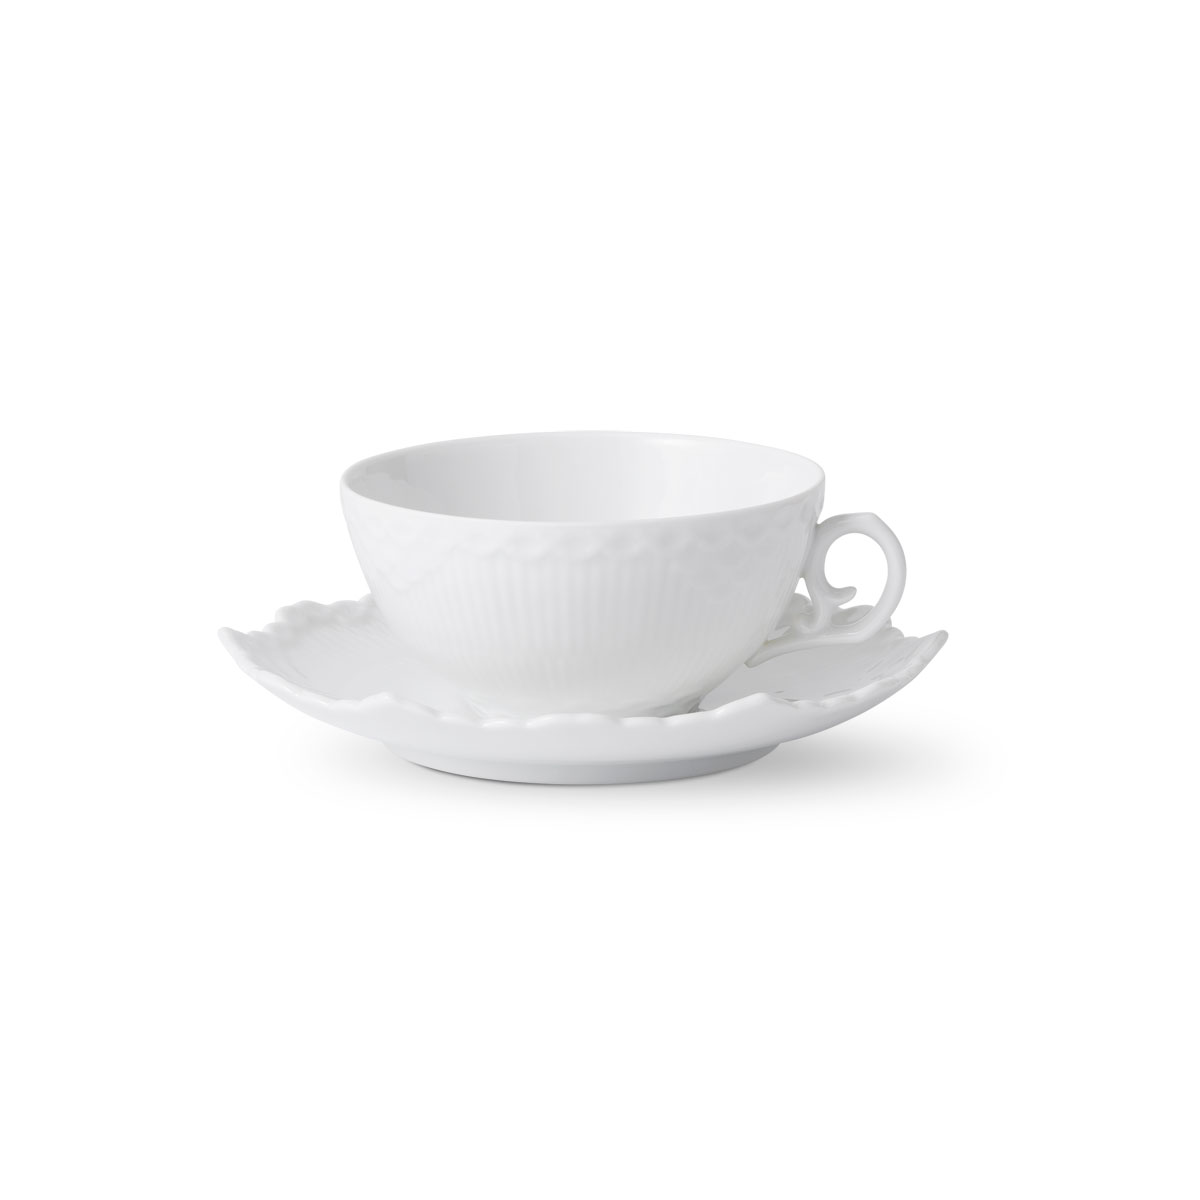 Royal Copenhagen White Fluted Full Lace Tea Cup and Saucer